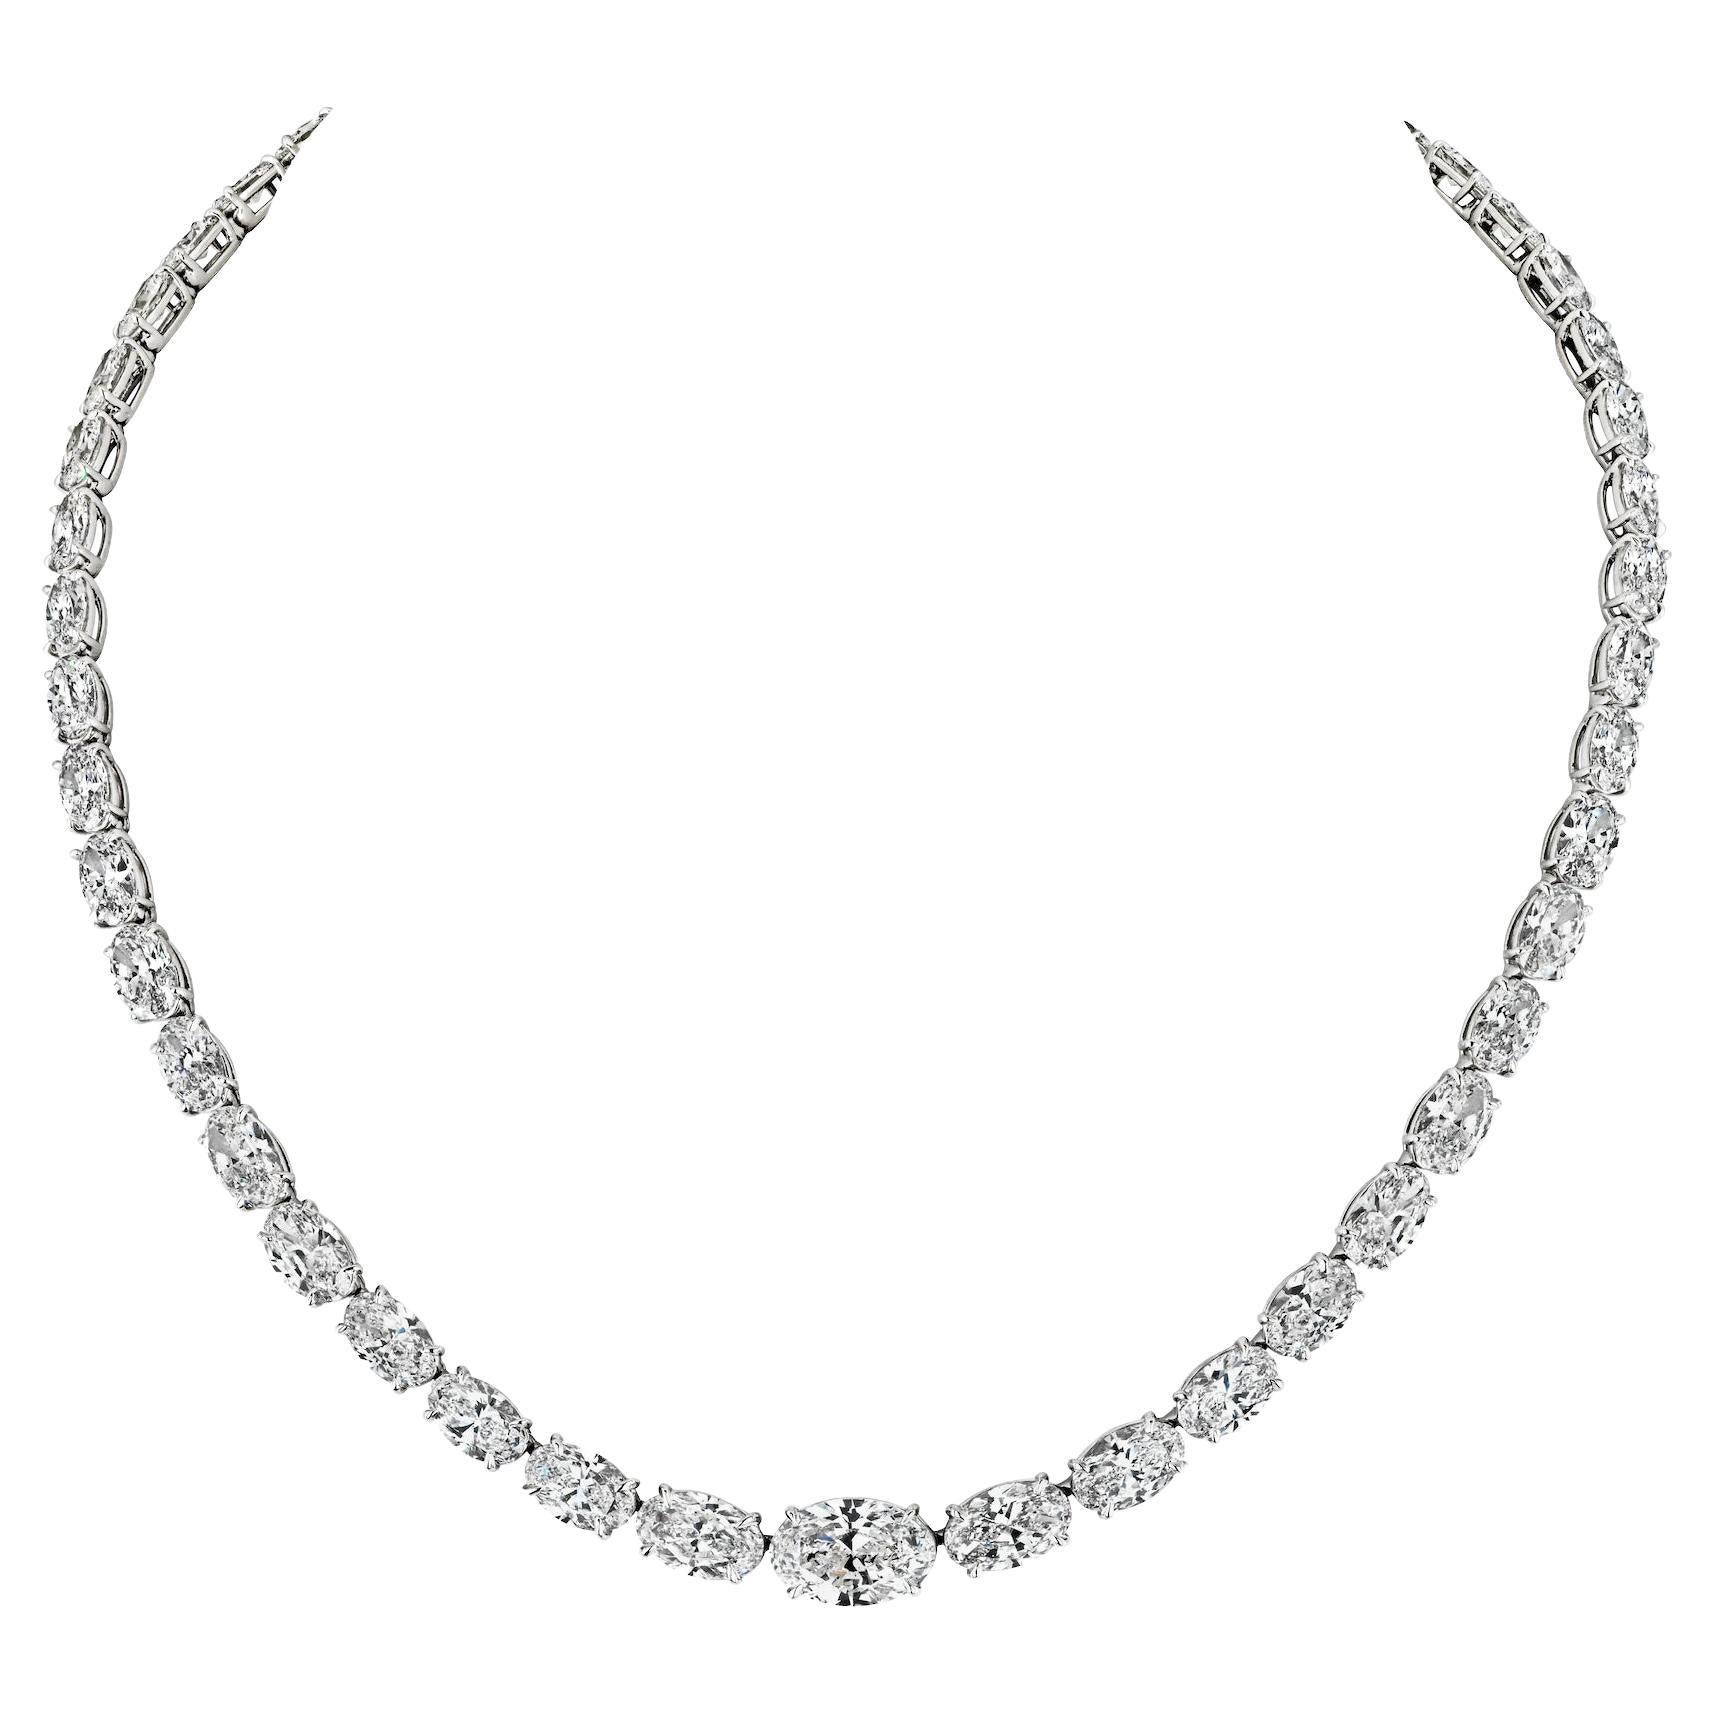 Louis Newman & Co GIA Certified 35.13 Carats Oval Cut Diamond Riviera Necklace